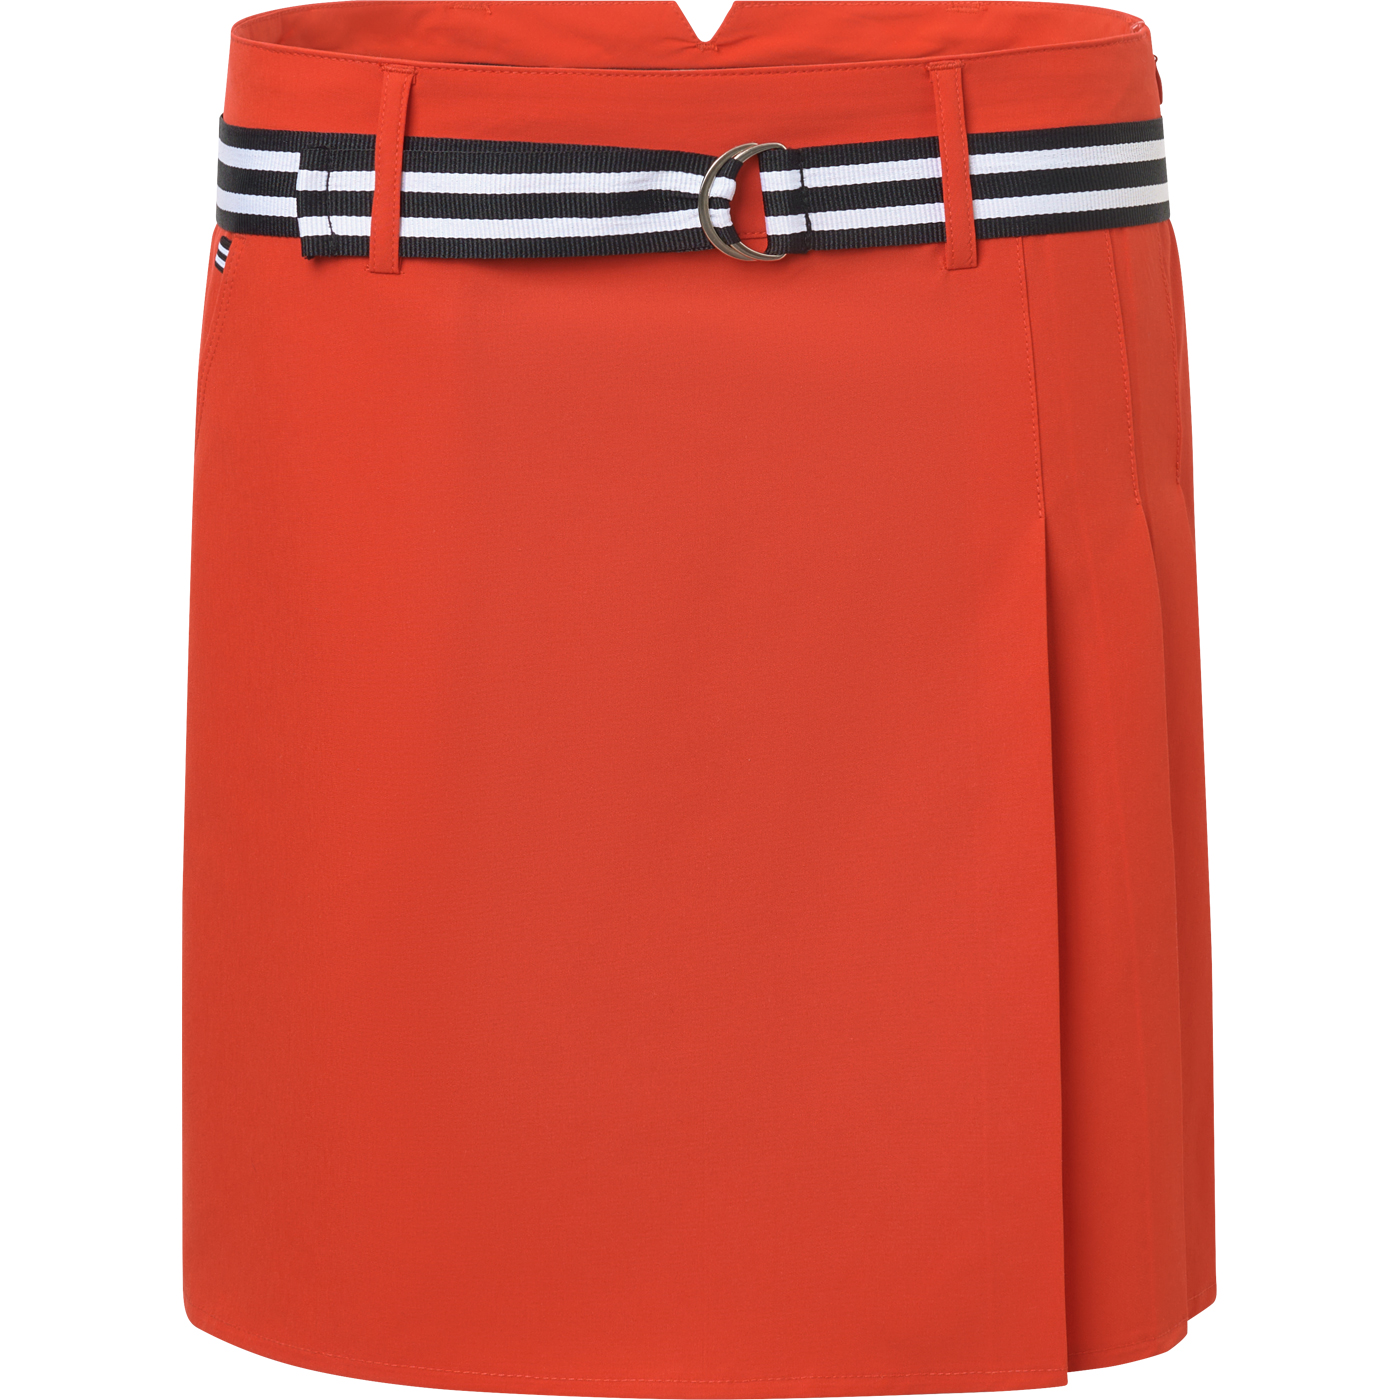 Lds Kildare skort 45cm - poppy red in the group WOMEN / All clothing at Abacus Sportswear (2978416)